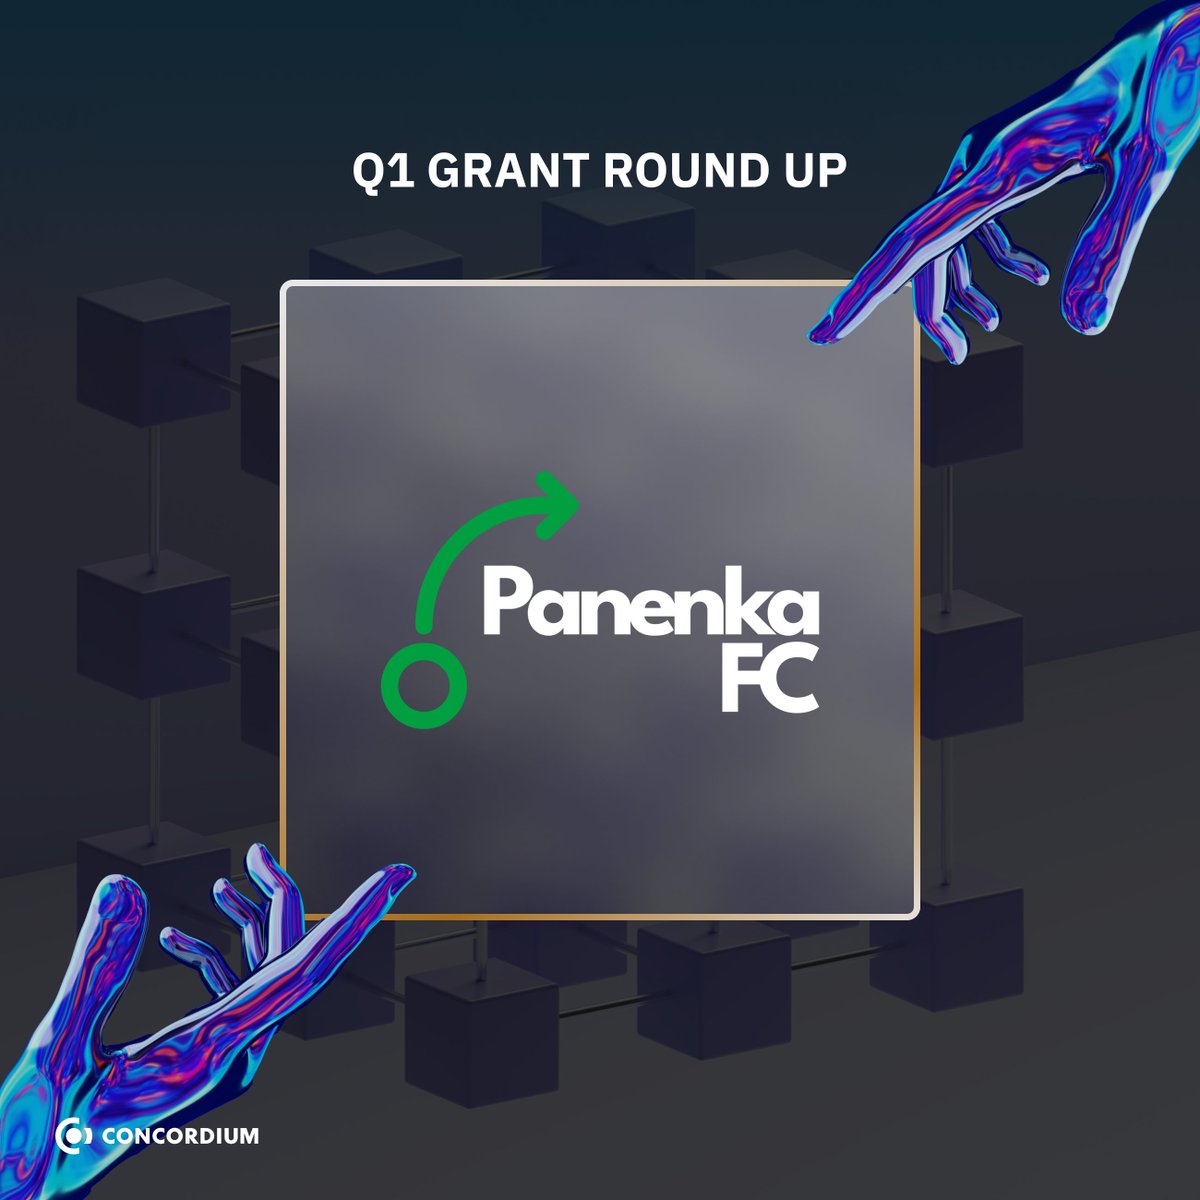 🌟 Q1 Grant Roundup focus of the week is @PanenkaFC90 ! 🚀 Panenka FC is revolutionizing fantasy football with a user-friendly platform. With Concordium blockchain technology, Panenka FC ensures secure ID verification, transparent transactions, and automated game management,…